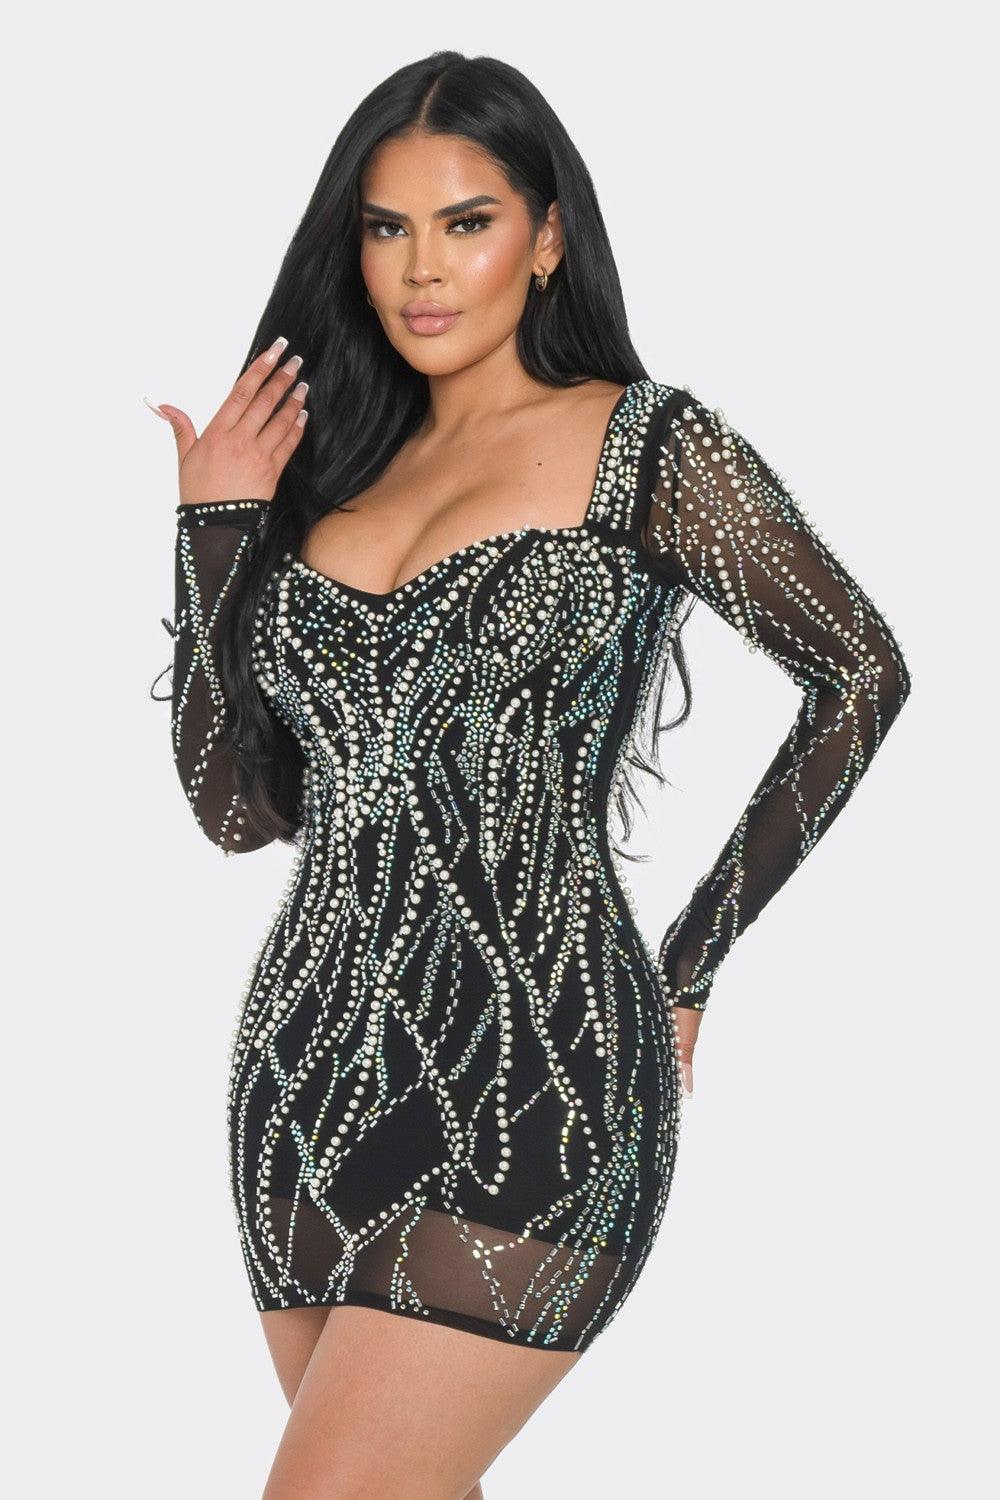 Custom Beaded Mermaid Shimmer Evening Gown With Rhinestone Sheer Detailing  And Jewel Corset Luxury Jewellery, Floor Length For Red Carpet Events And  Celebrity Events From Werbowy, $509.09 | DHgate.Com